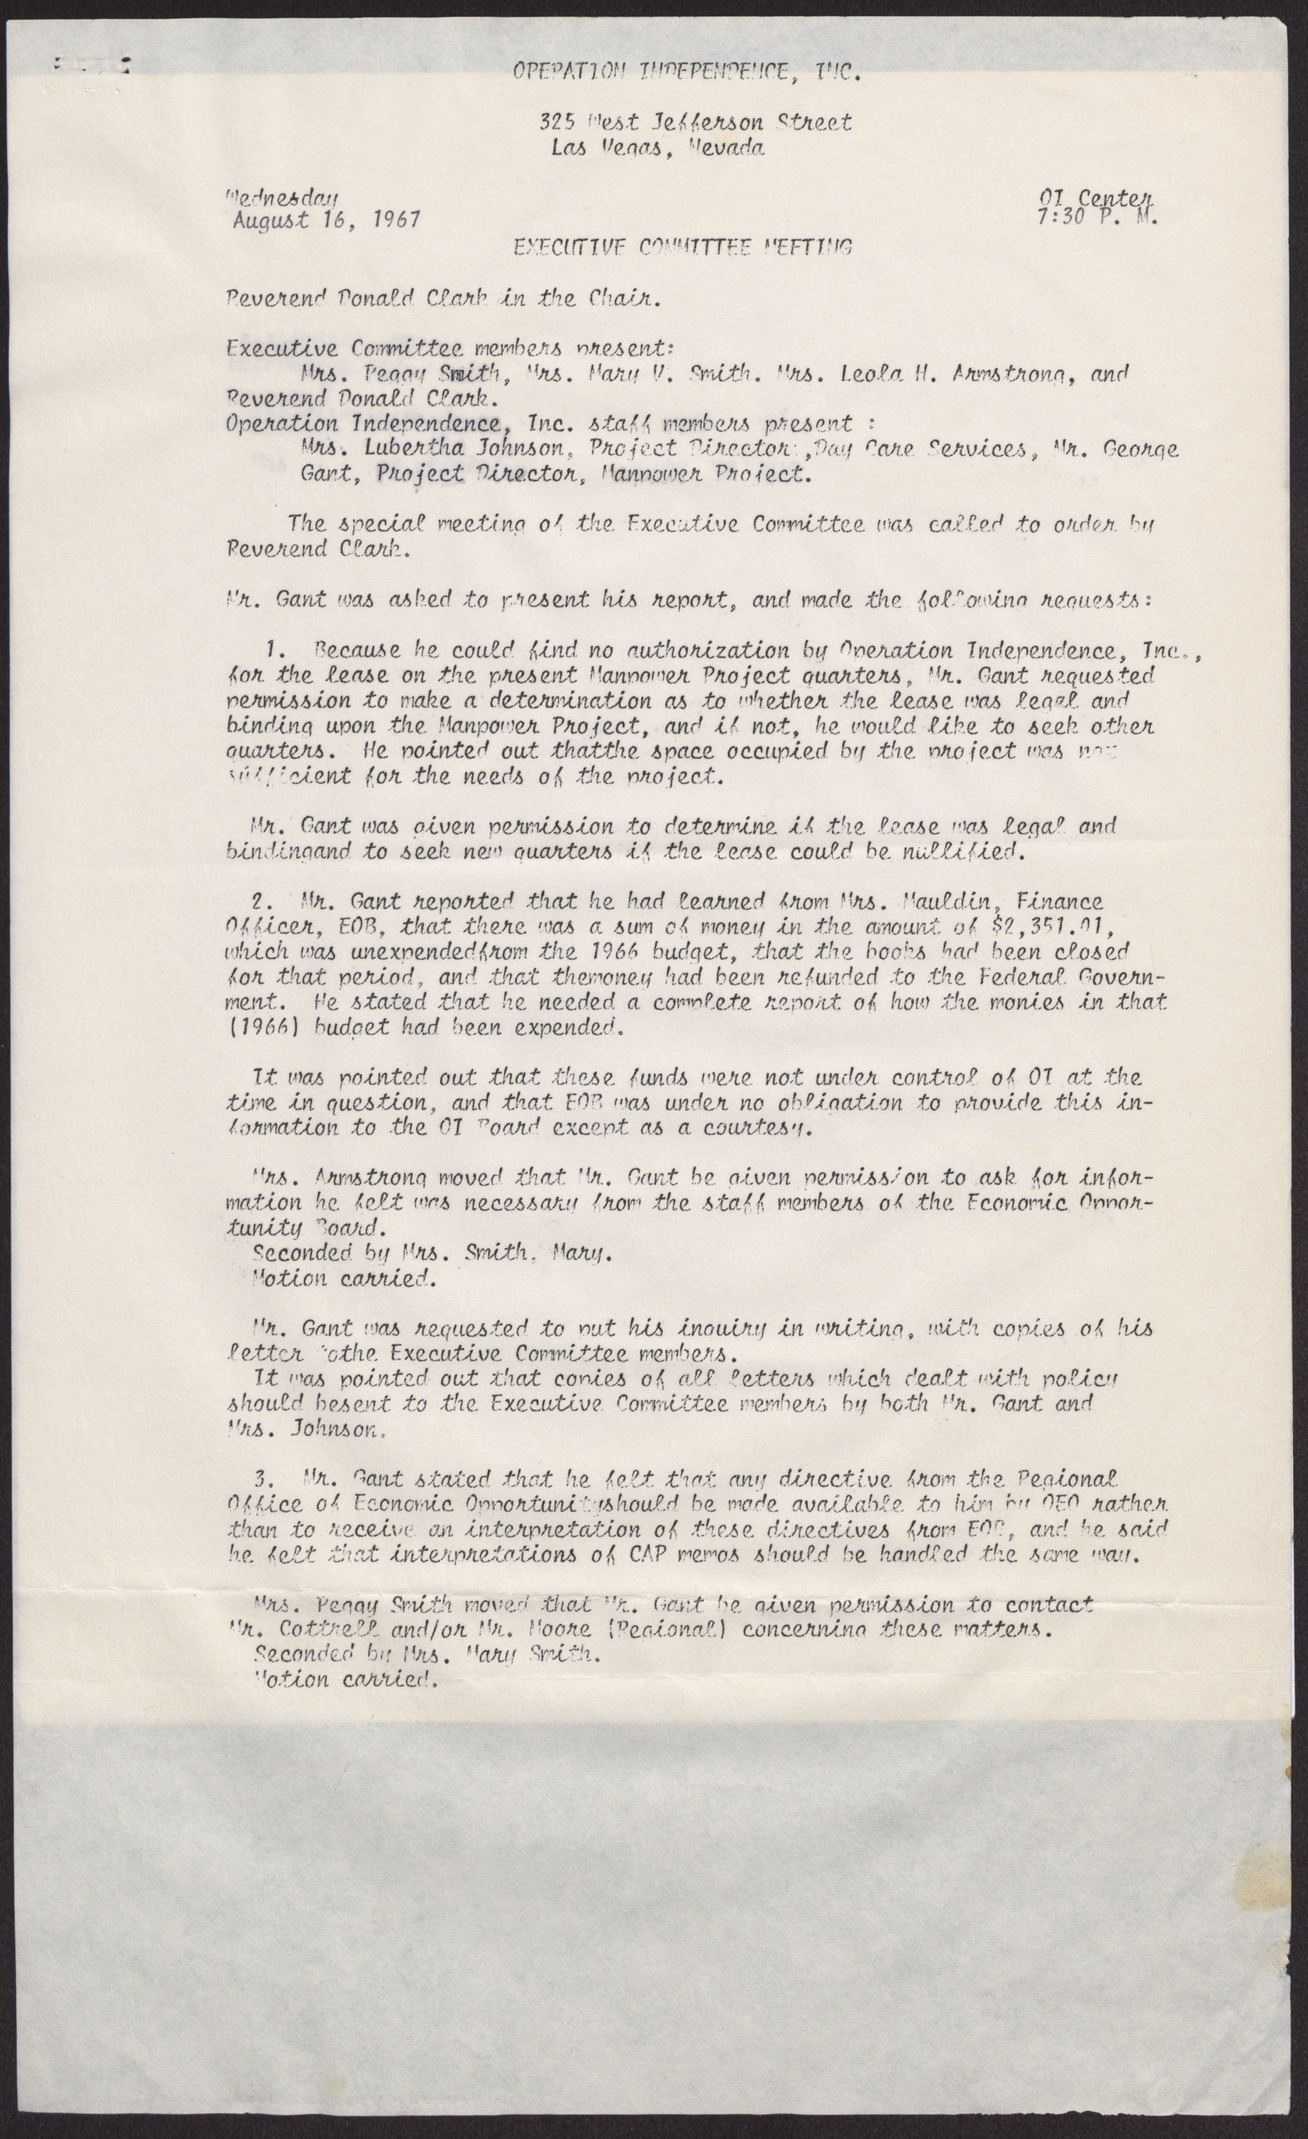 Minutes from an Operation Independence, Inc. Executive Committee Meeting (4 pages), August 16, 1967, page 2